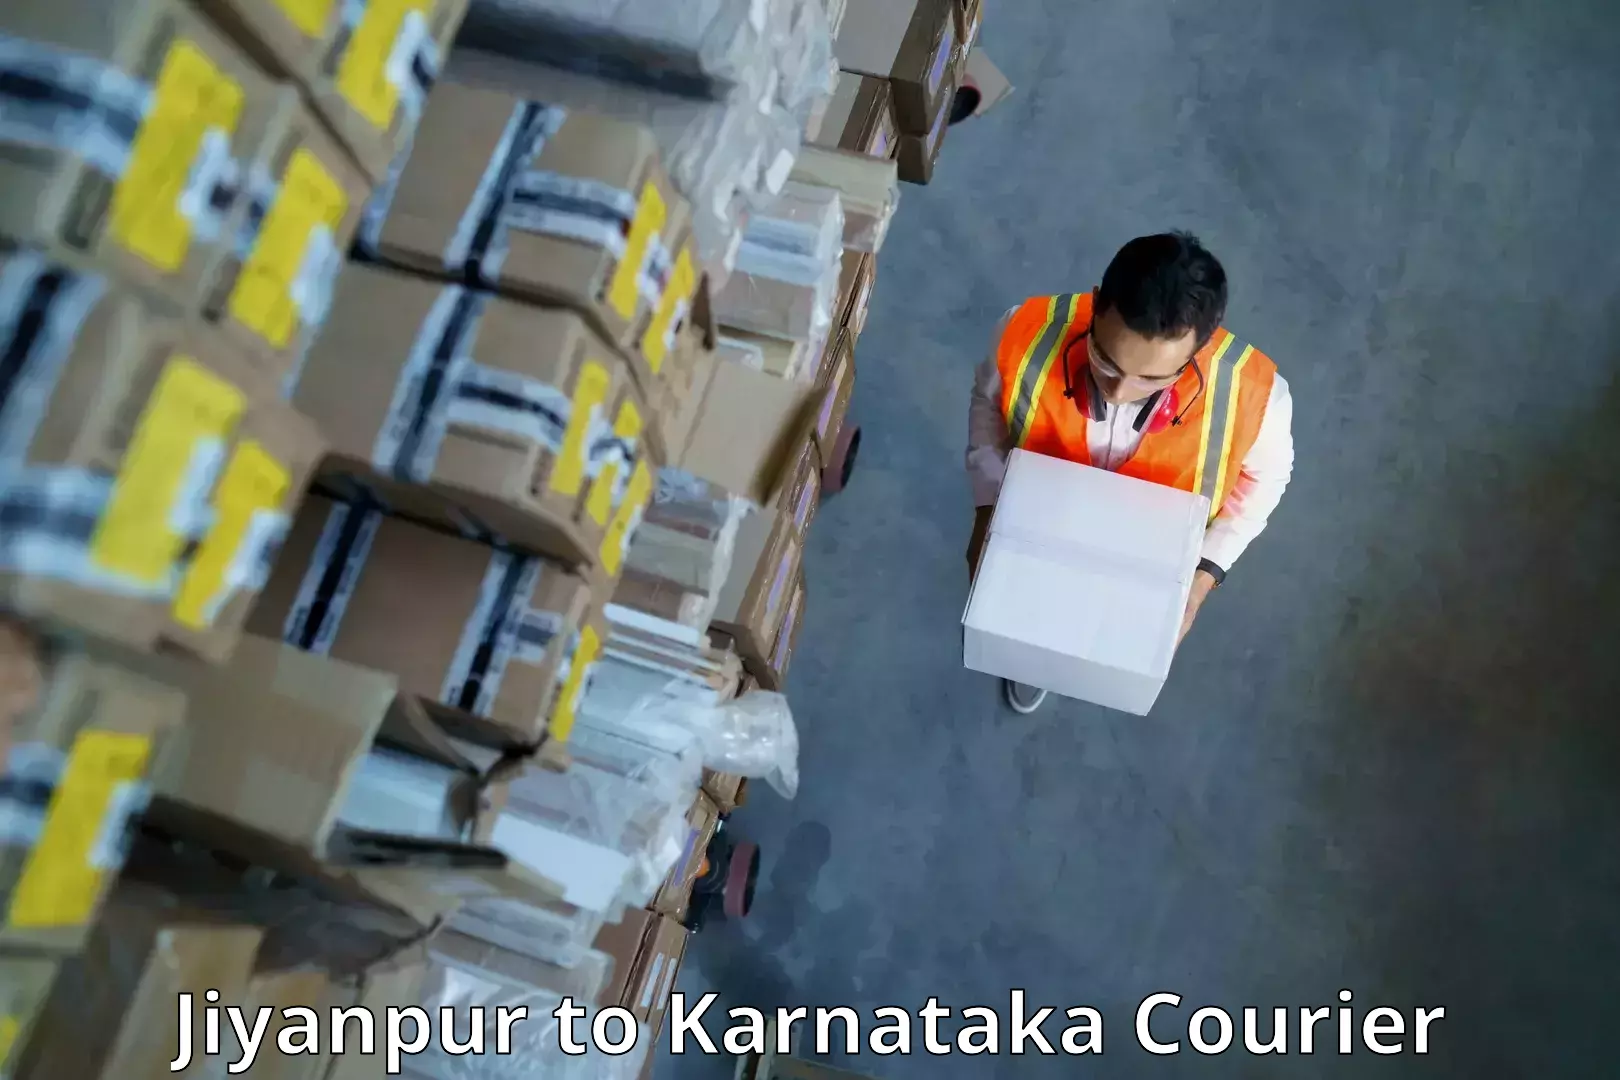 Small business couriers Jiyanpur to Kollegal